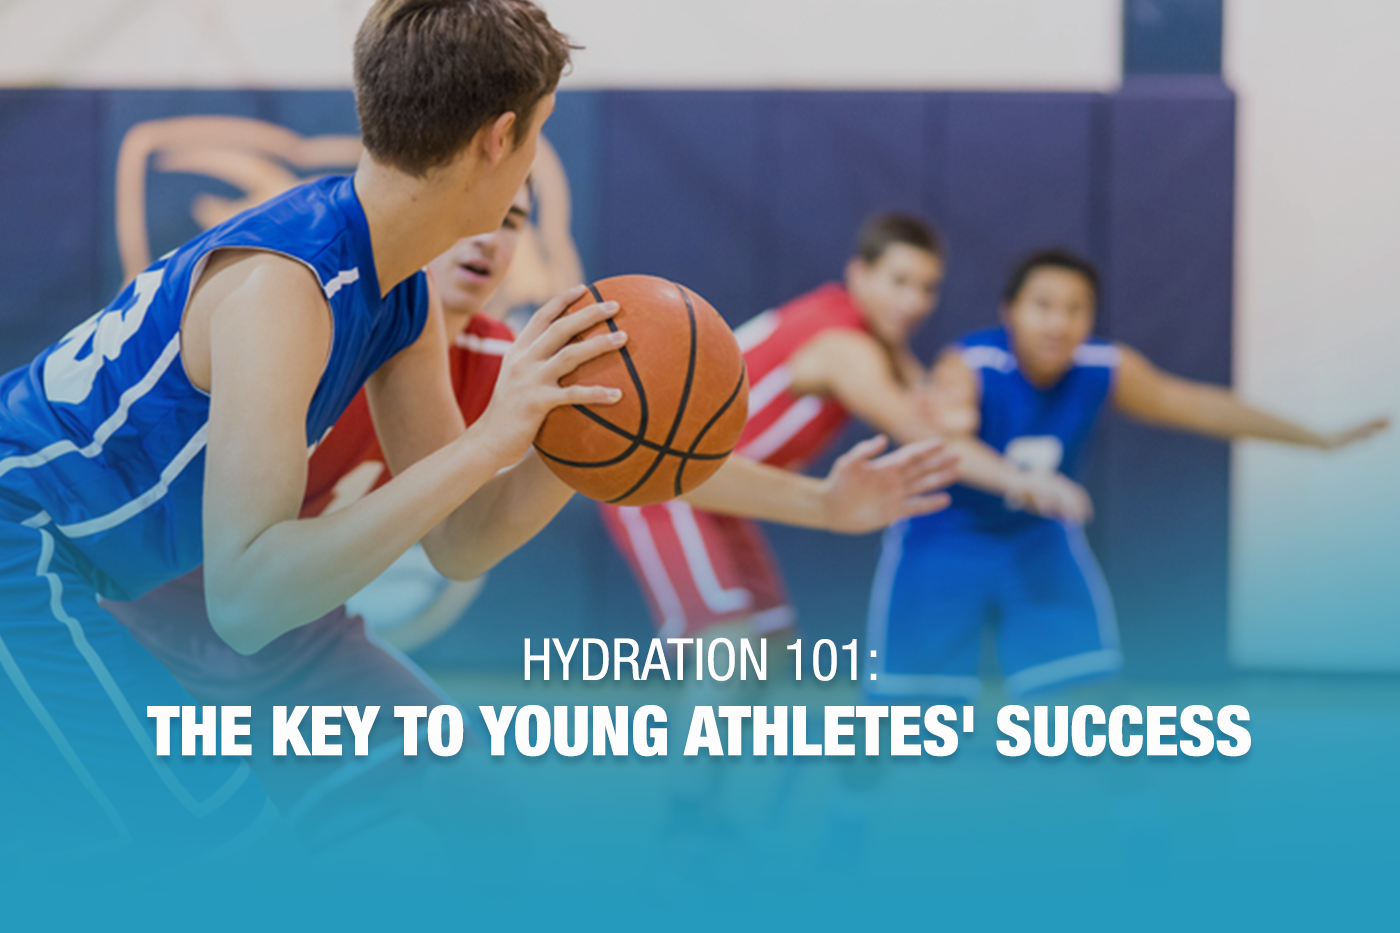 Hydration and immune function in youth athletes